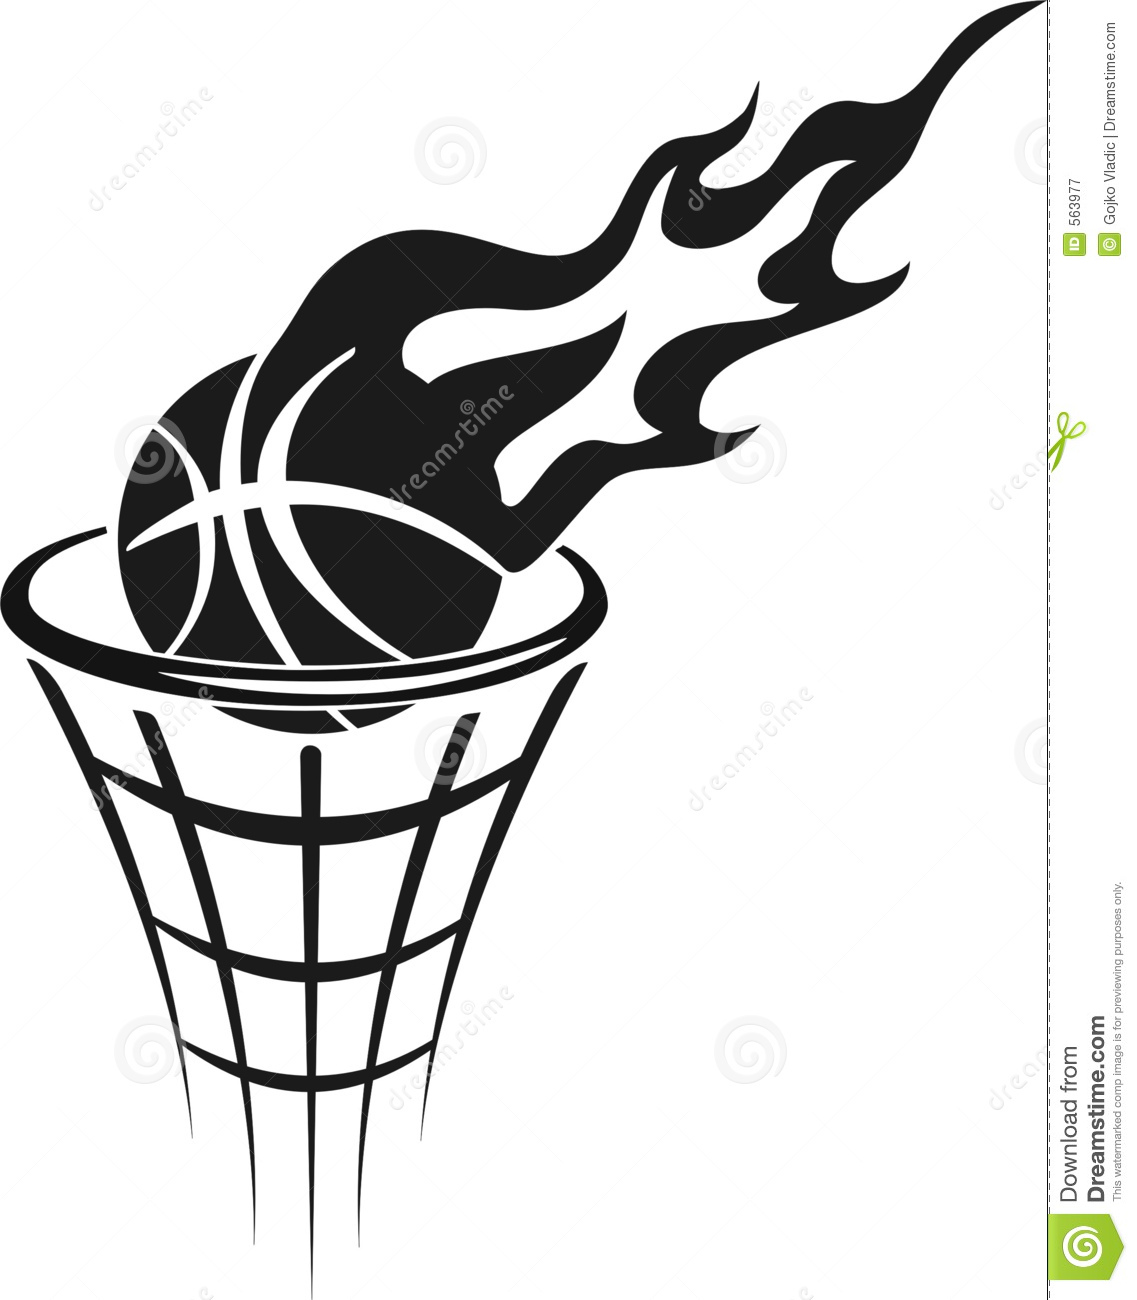 Basketball Logo Black And White | Free download on ClipArtMag